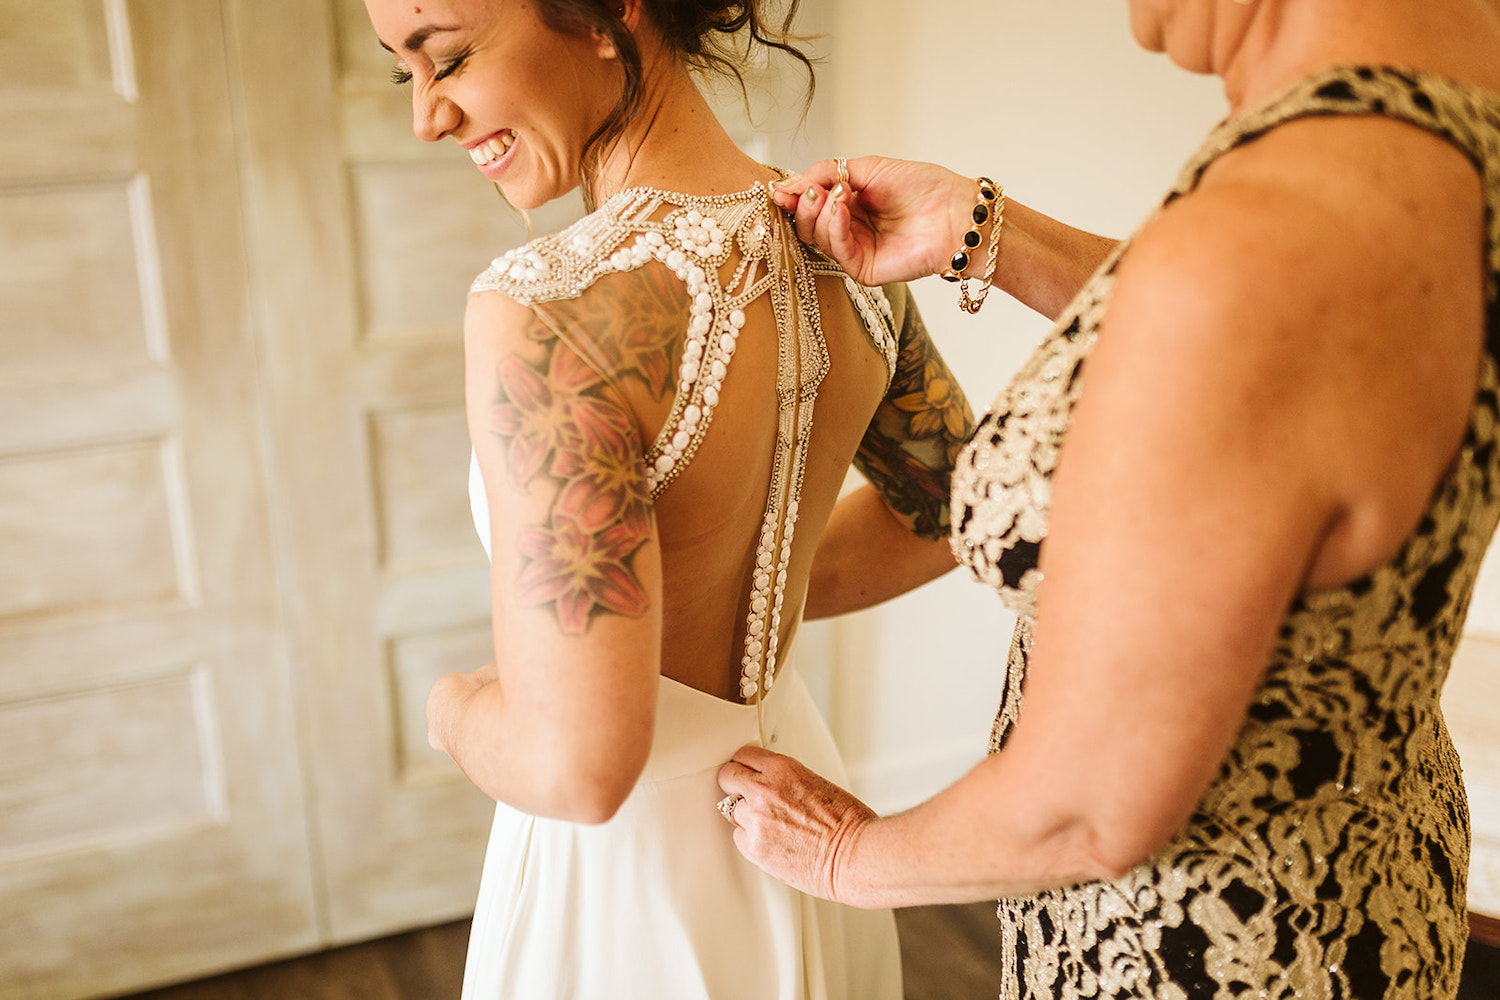 woman in lace dress zips the back of bride's gown while bride laughs